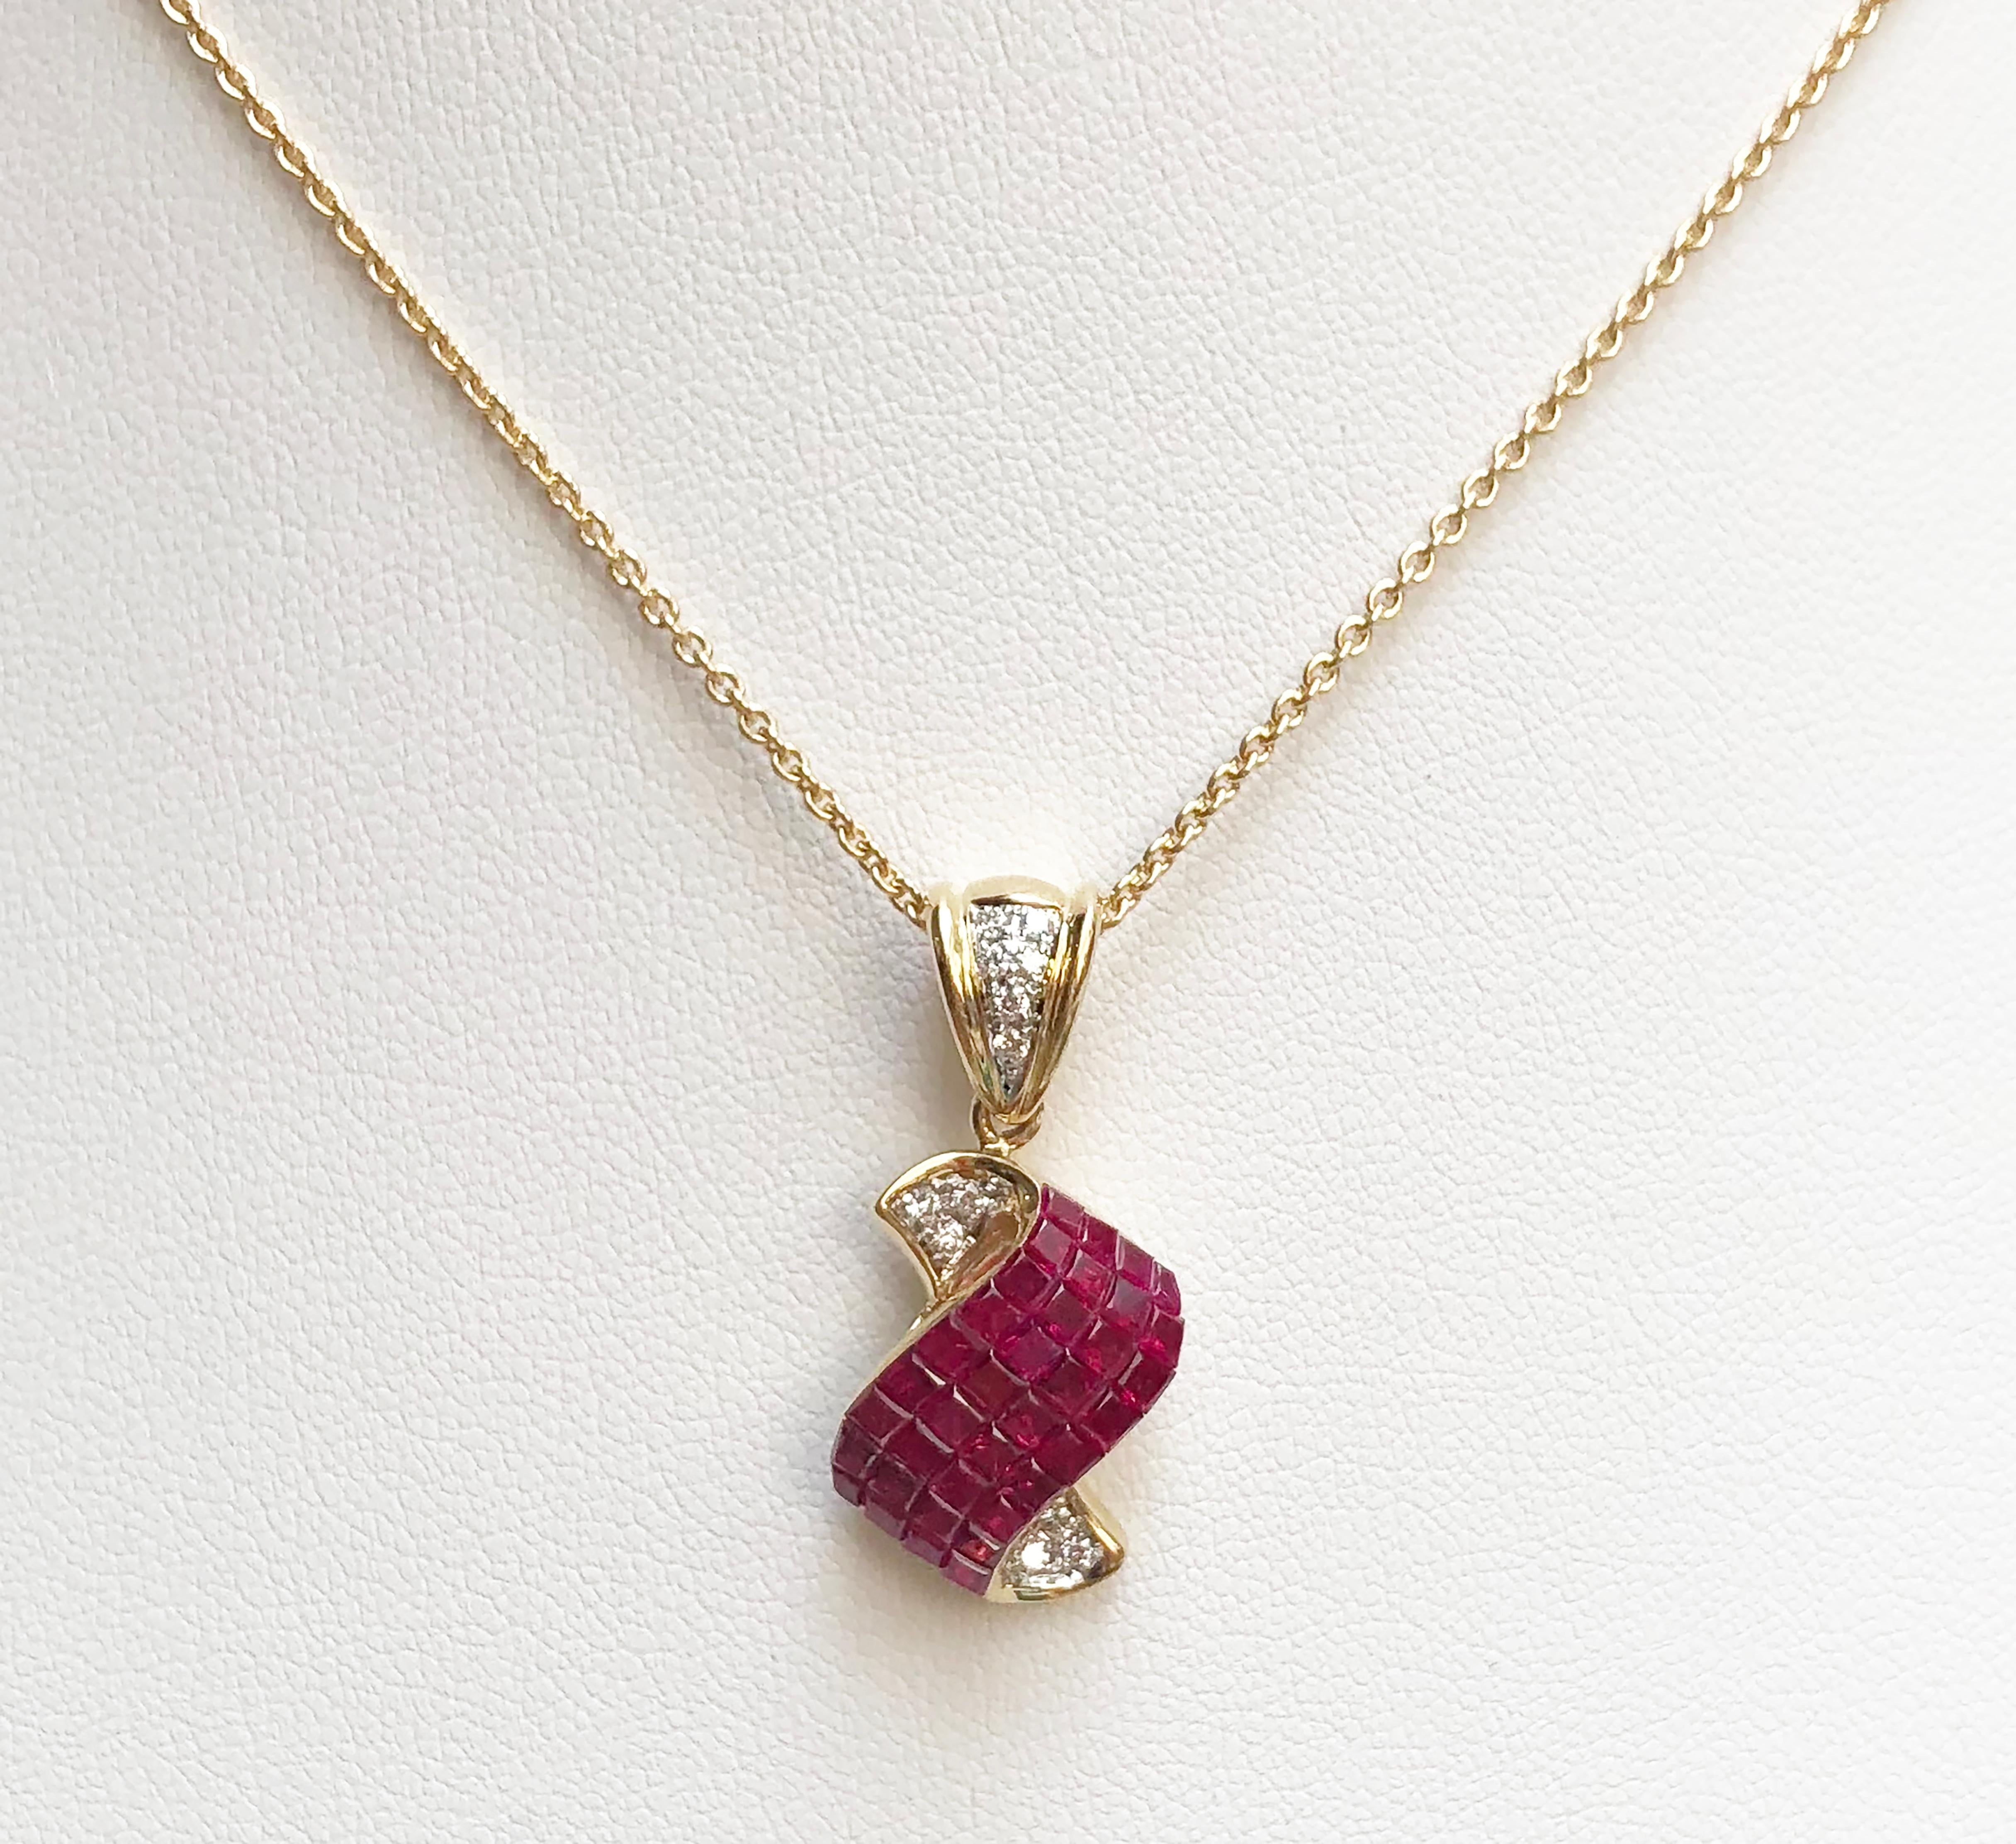 Ruby 2.50 carats with Diamond 0.12 carat Pendant set in 18 Karat Gold Settings
(chain not included)

Width:  1.3 cm 
Length: 2.7 cm
Total Weight: 6.1 grams

